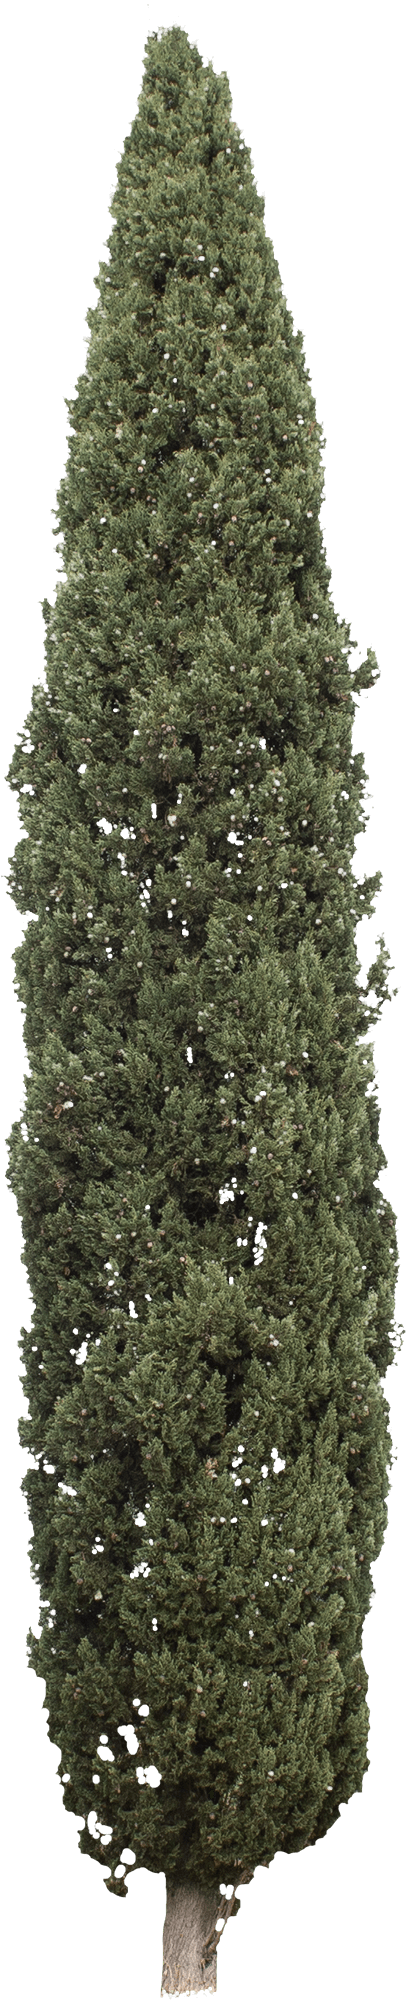 meye cupressus sempervirens cypress cut out tree in png